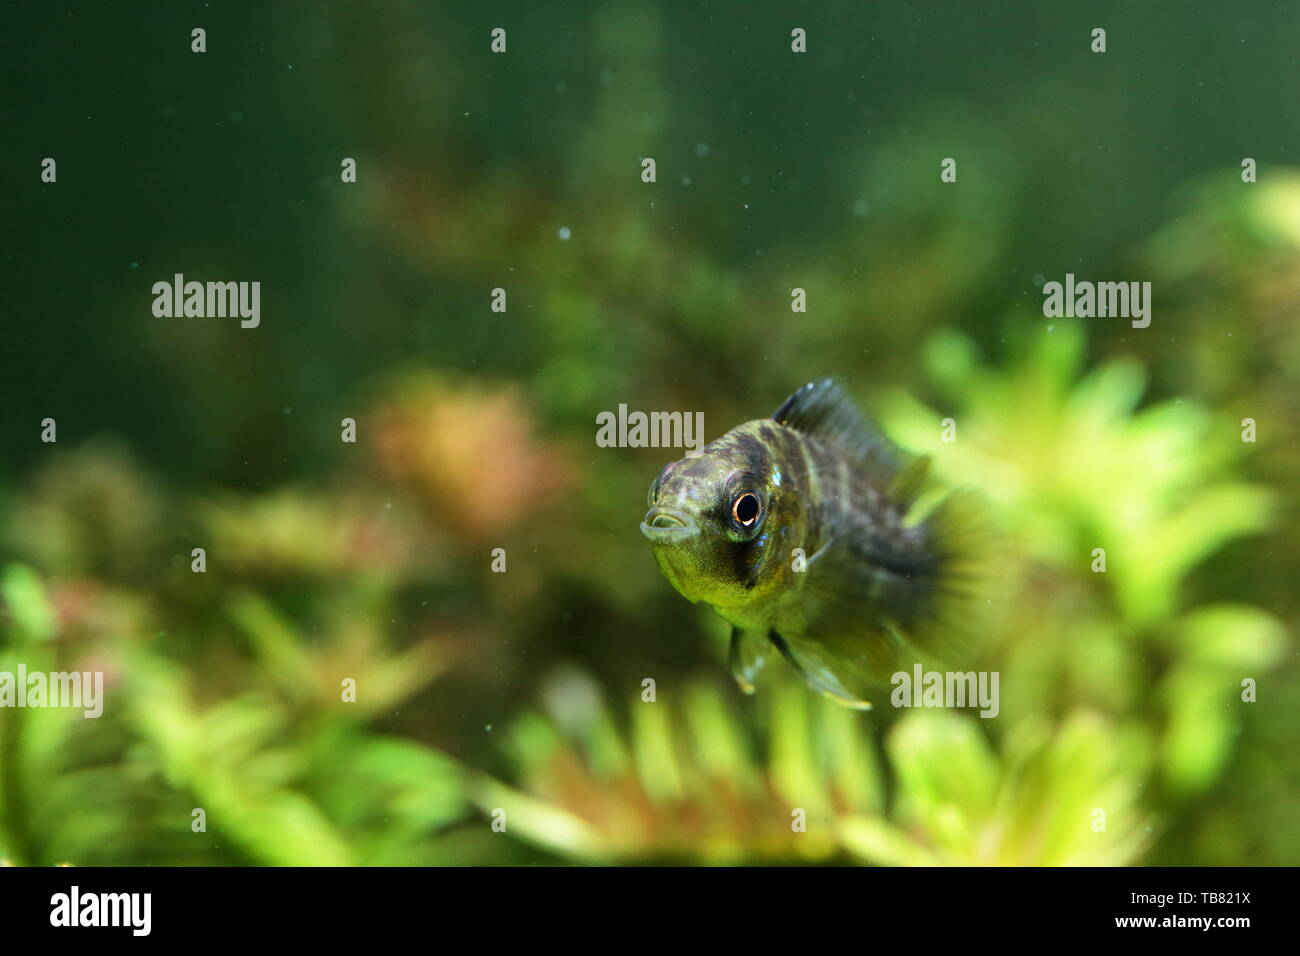 Young yellow dwarf cichlid in a planted aquarium Stock Photo